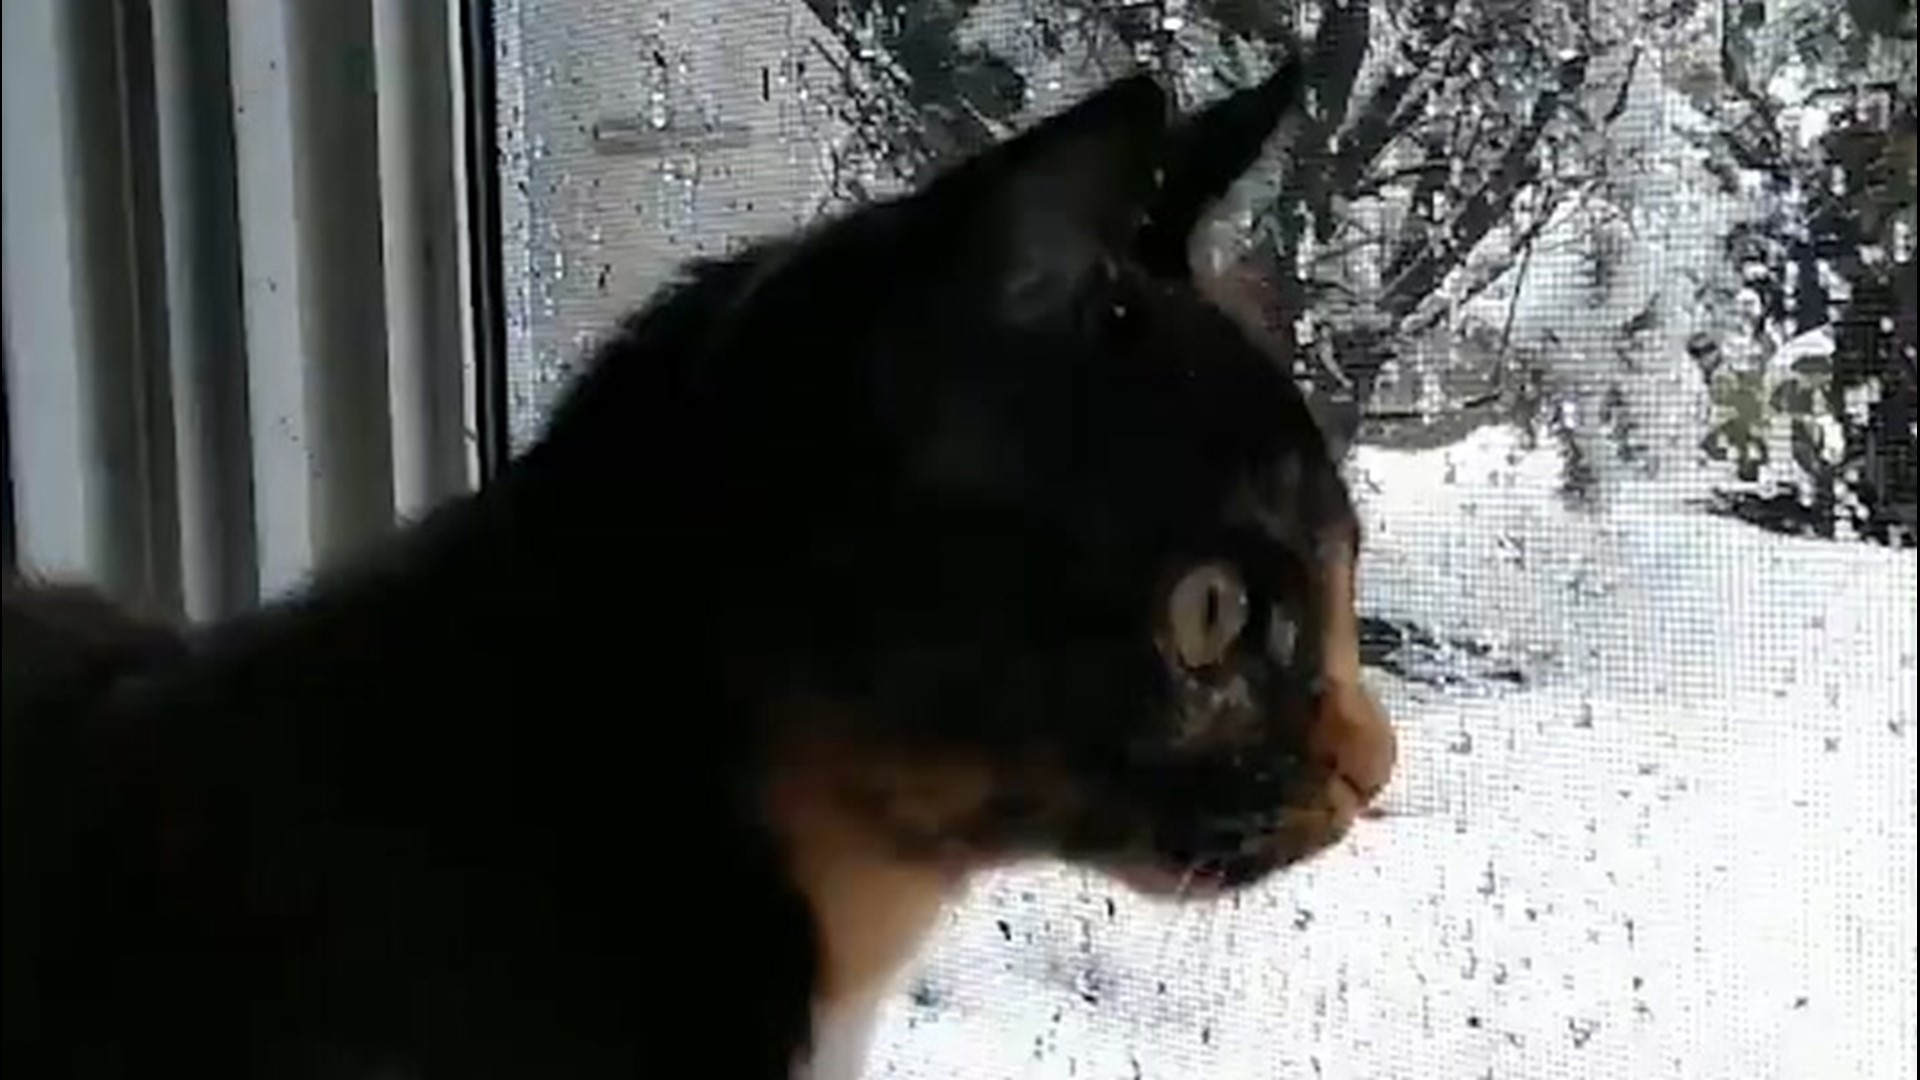 The recent snowfall in Saugus, Massachusetts, caught this cat's attention as it curiously looks out the window on Oct. 30.